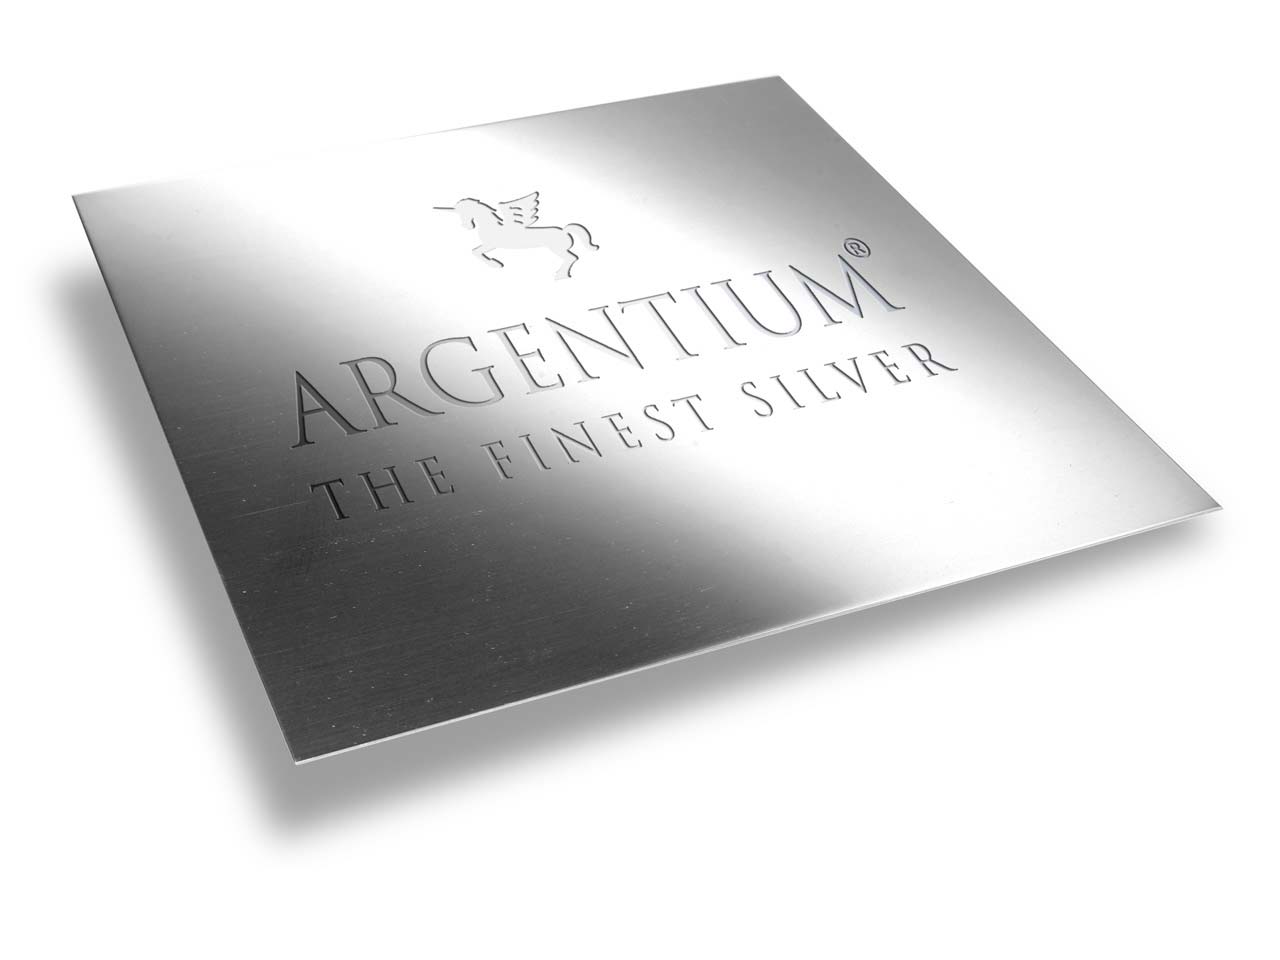 Argentium 940 Silver Sheet 0.80mm Questions & Answers